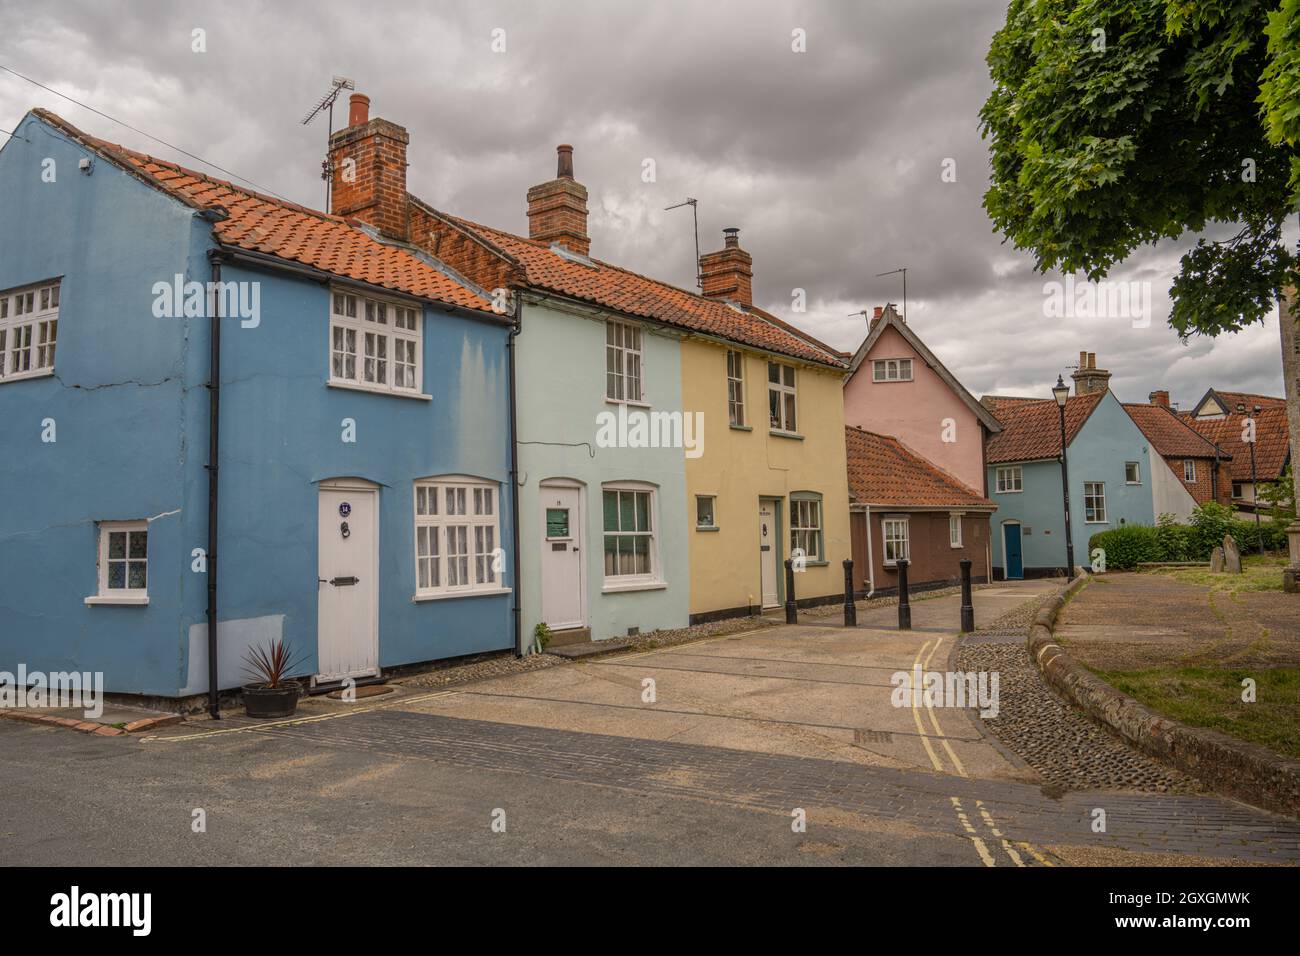 Brightly painted Houses in Halesworth Suffolk Stock Photo